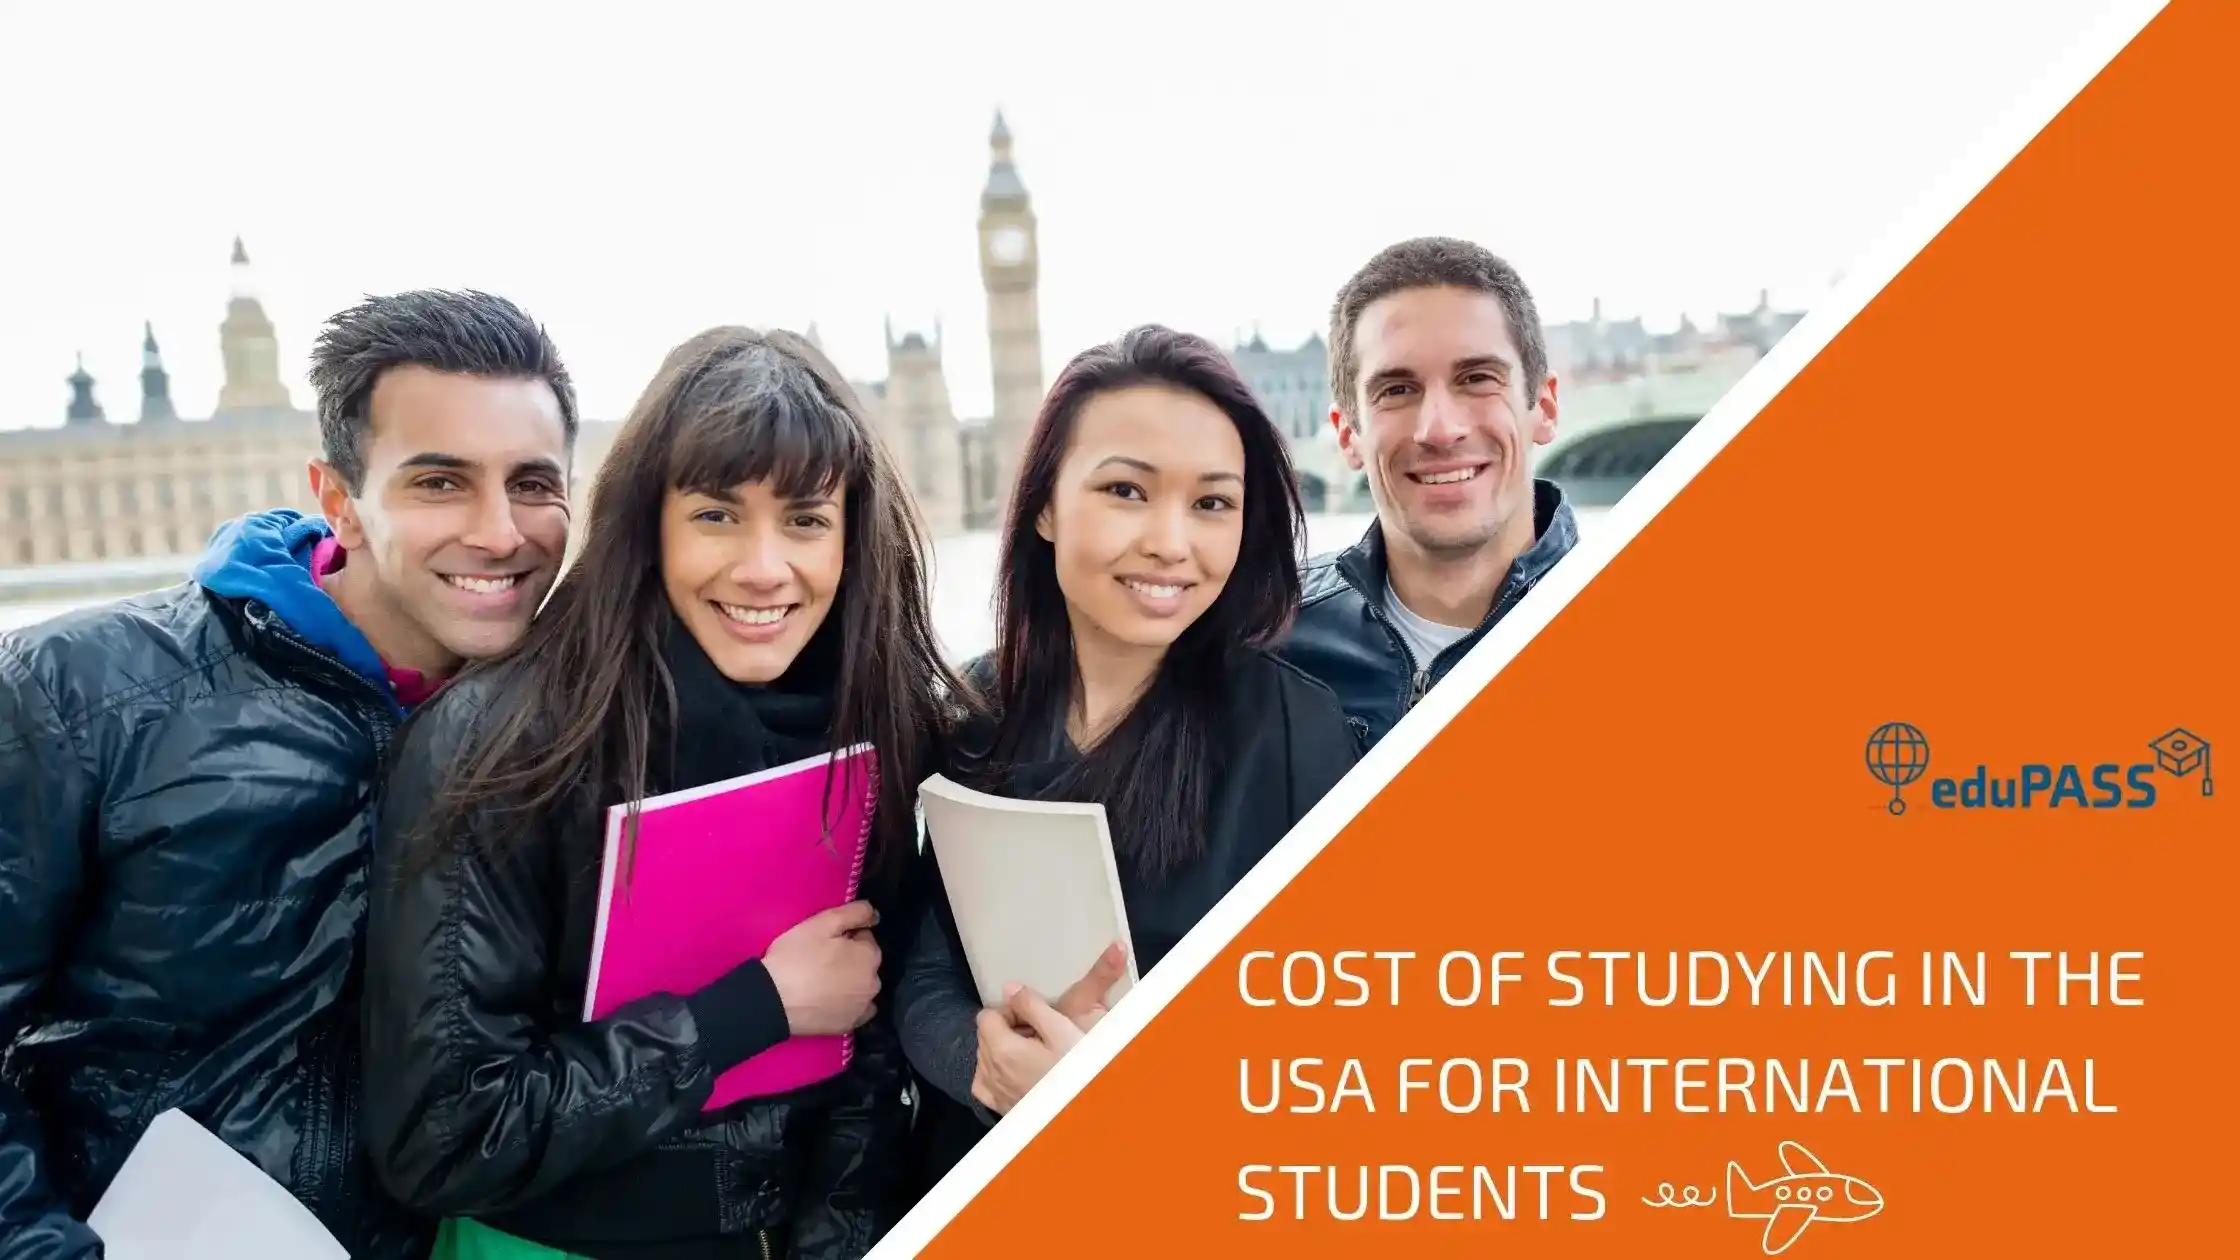 Cost of Studying in the U.S. for International Students